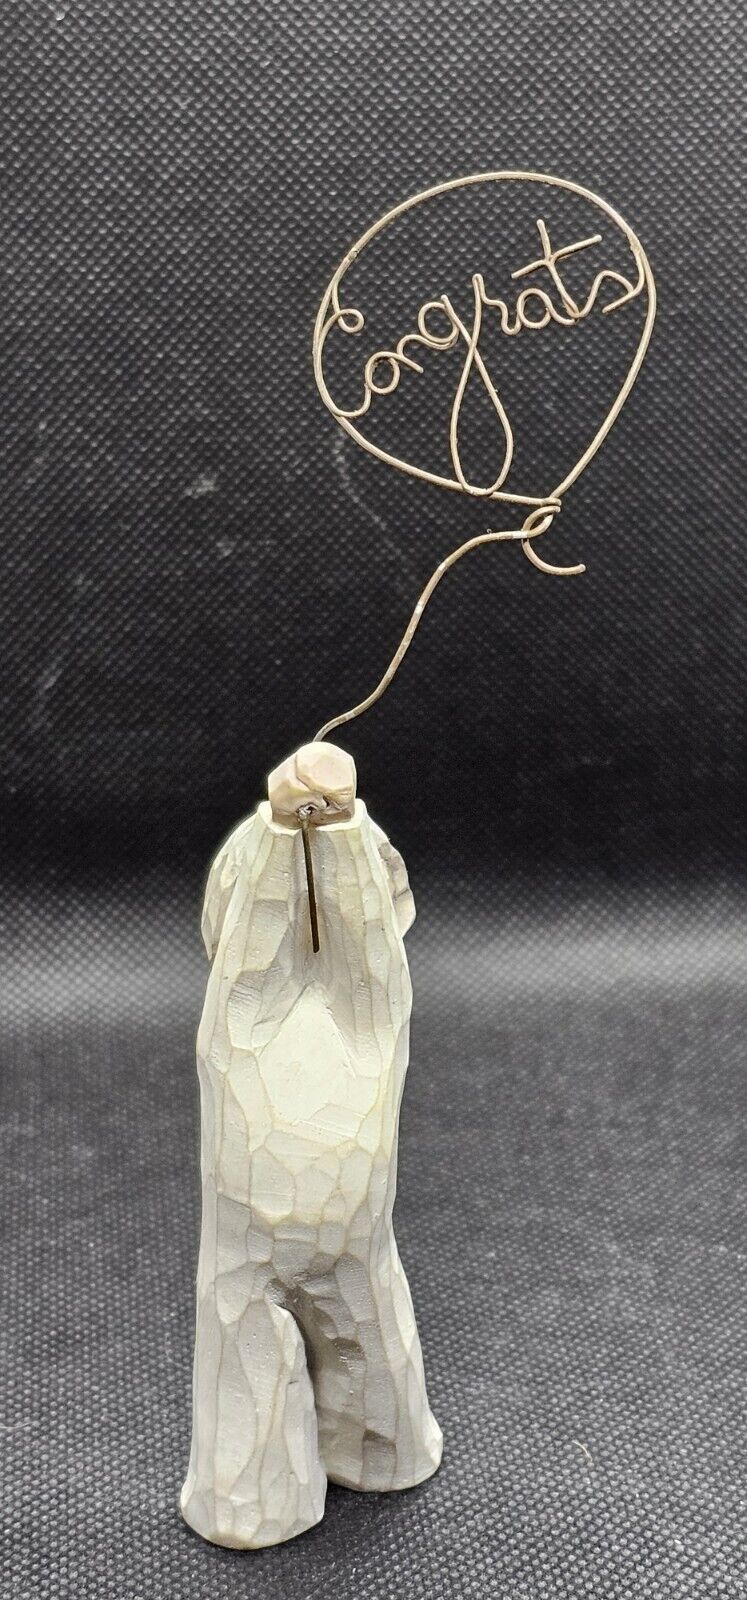 2005 Willow Tree #26172 by Susan Lordi  Congrats Figurine